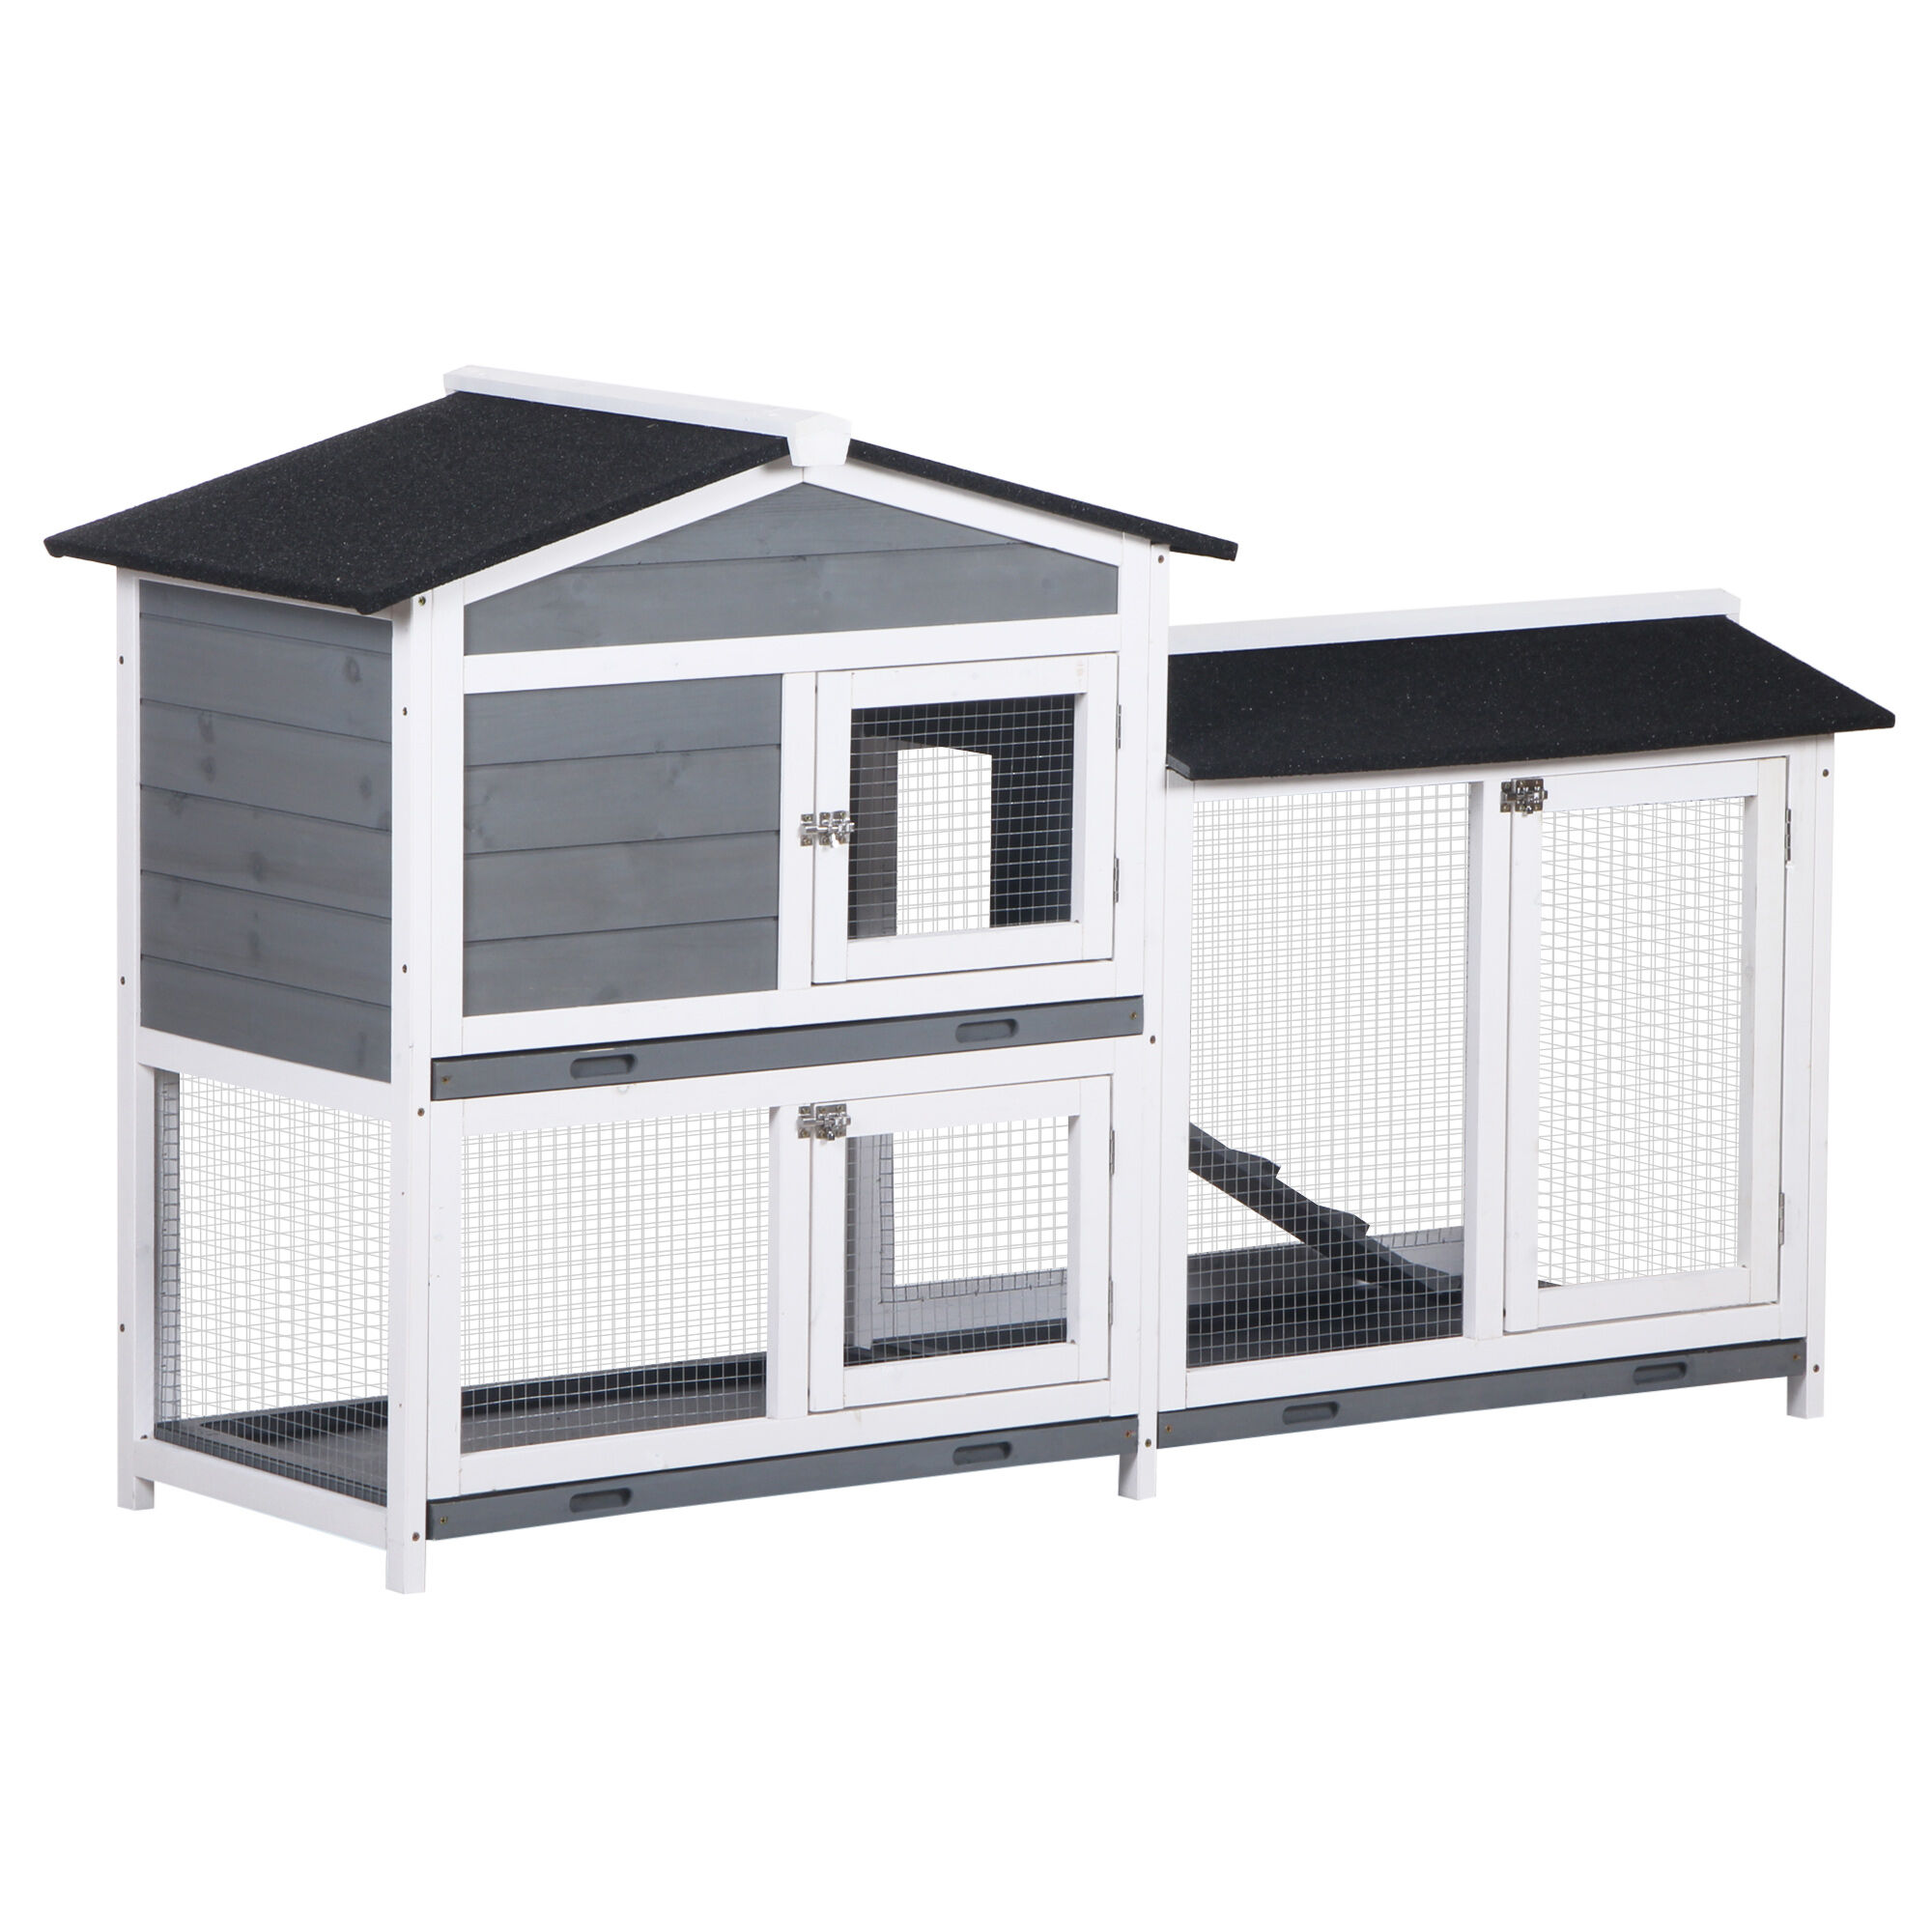 PawHut 2-Story Indoor Rabbit Enclosure, Rabbit Hutch Wooden Bunny Cage with Ramp Weatherproof Roof Gray   Aosom.com